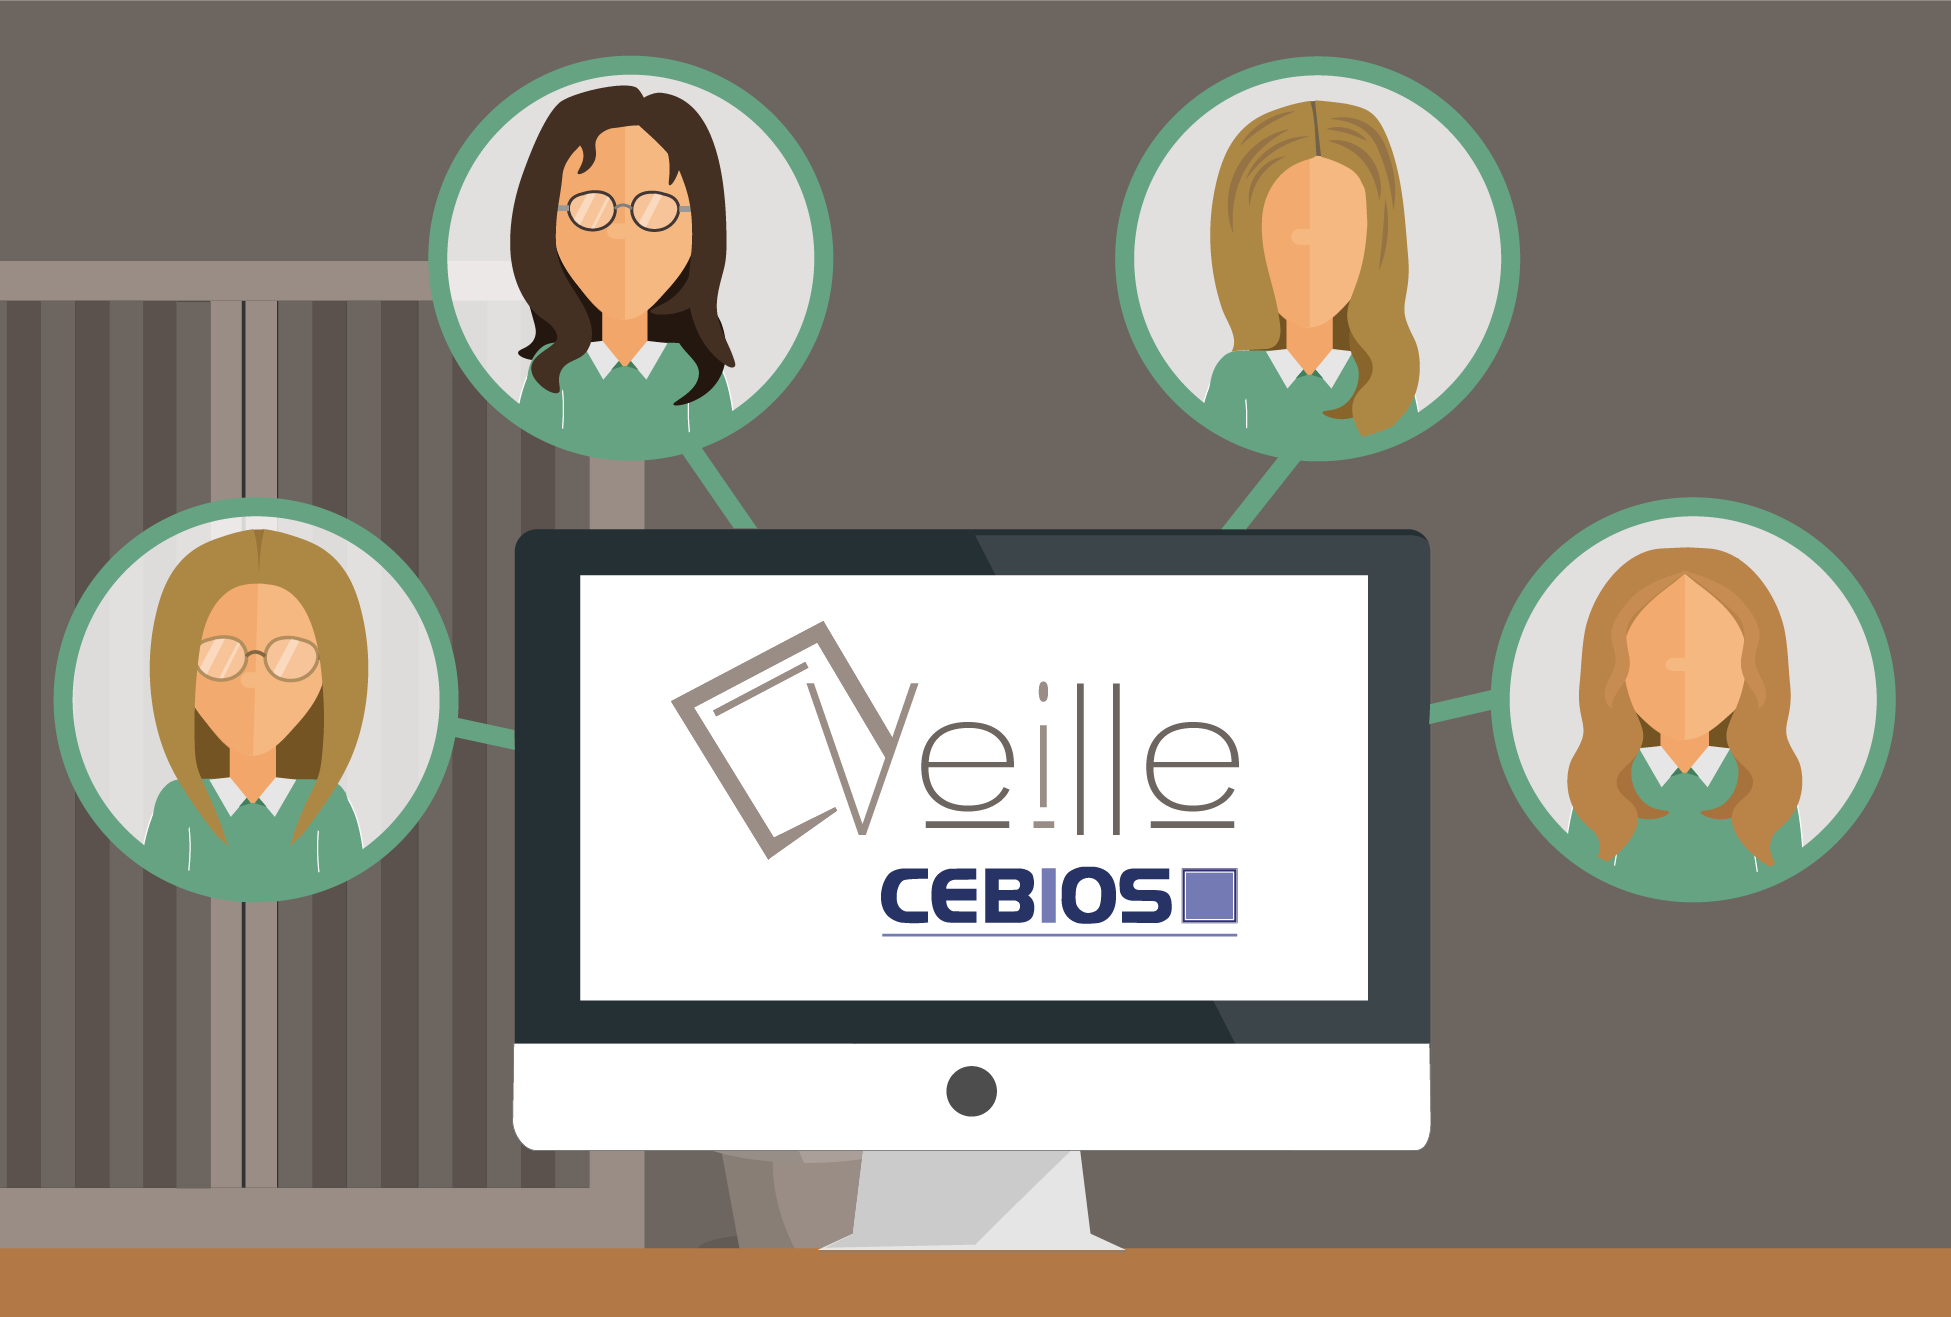 cebios-veille-backoffice-6512dc5ae0290.png